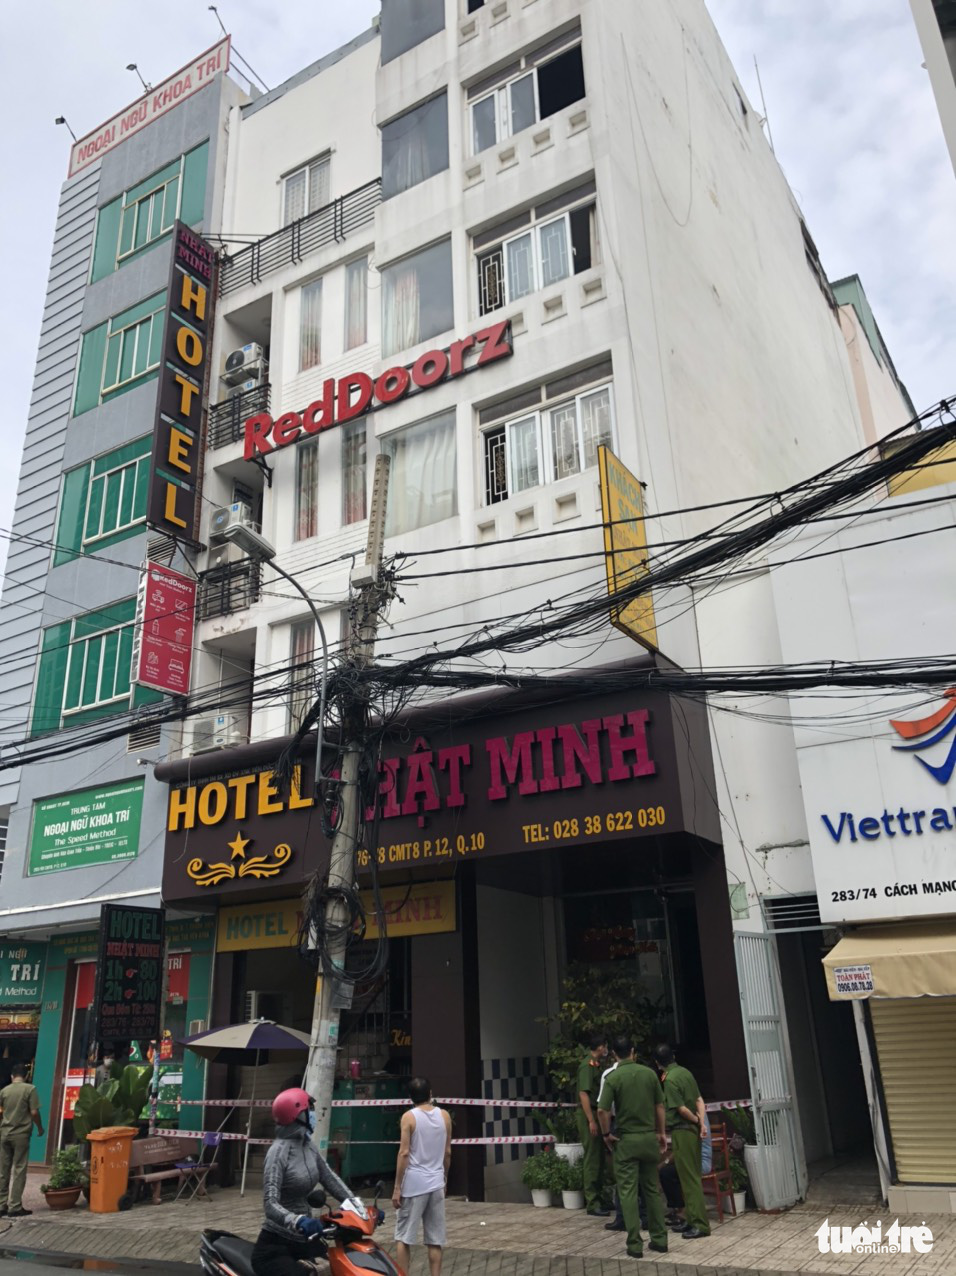 One killed, one injured in Ho Chi Minh City hotel fire